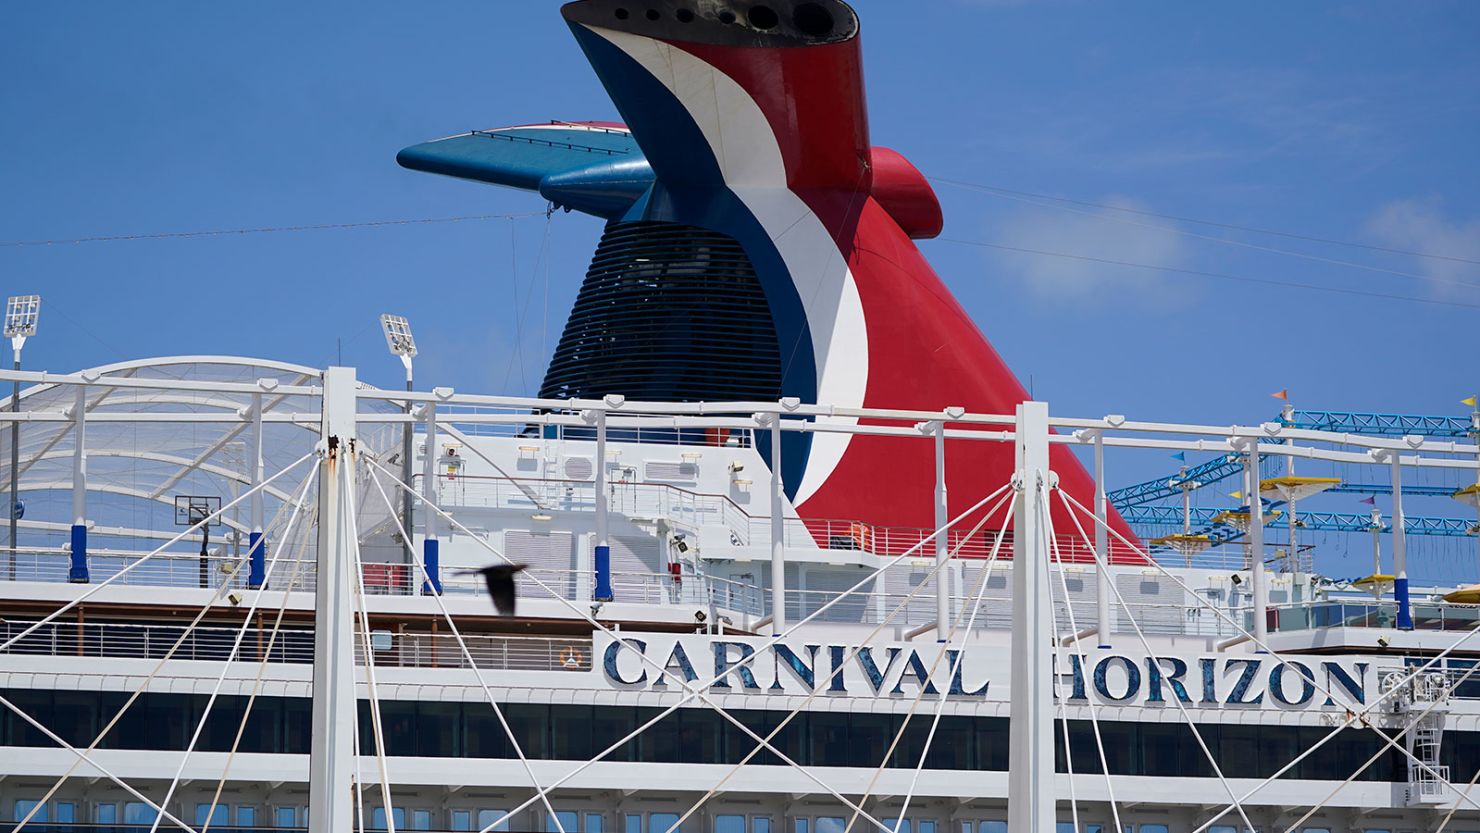 The Carnival Horizon was one of the cruise ships who made last-minute itinerary changes due to Hurricane Beryl.